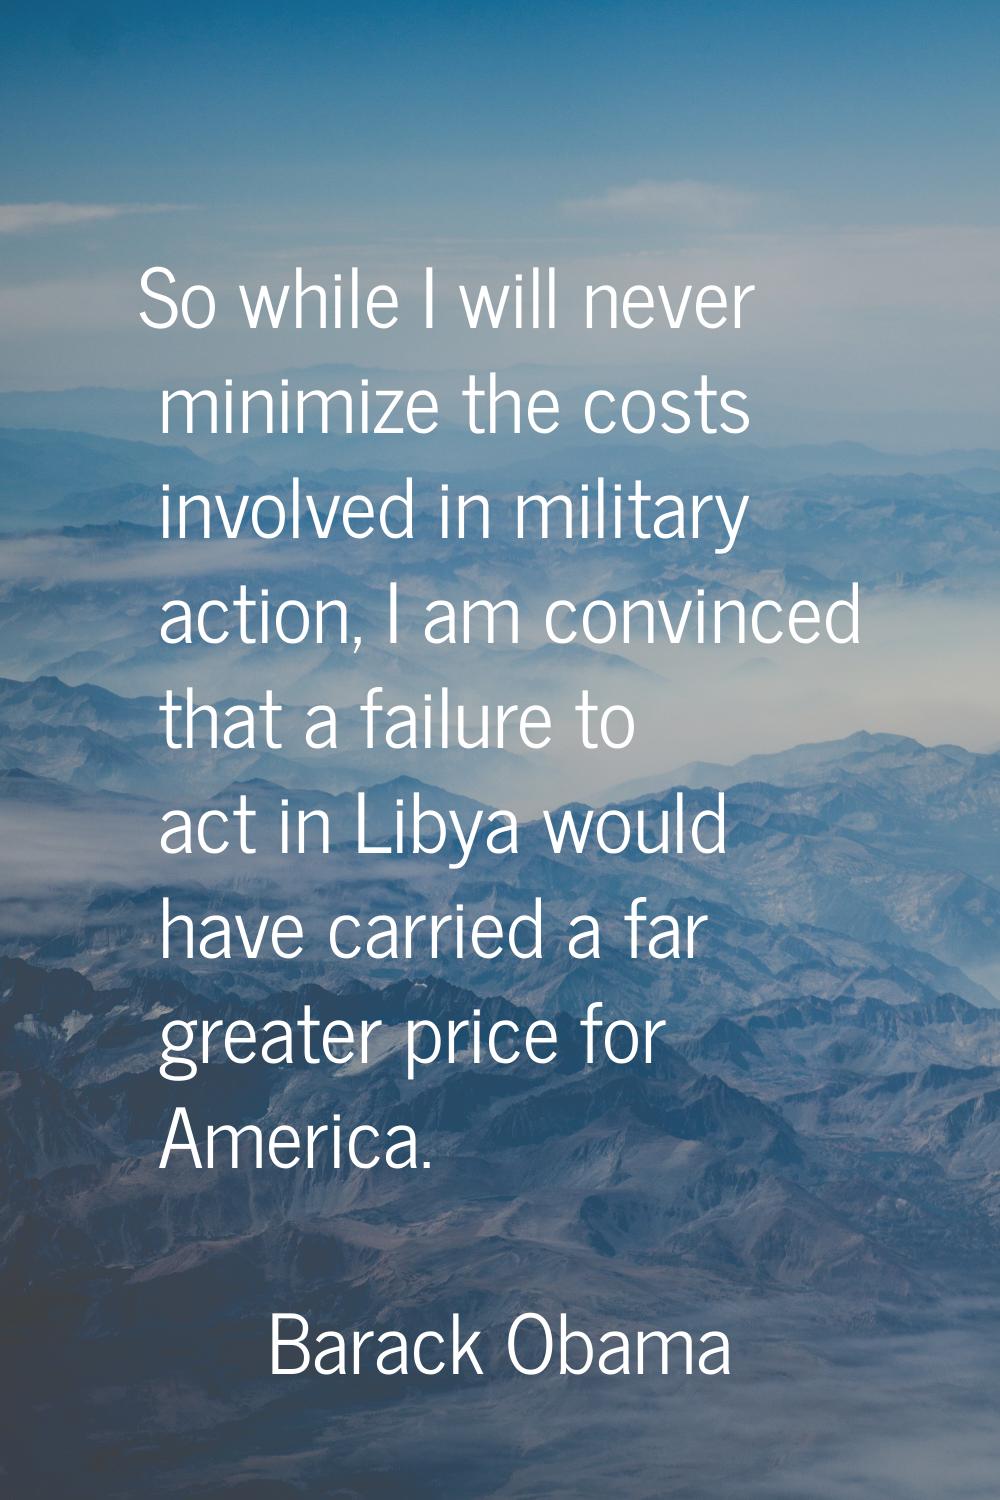 So while I will never minimize the costs involved in military action, I am convinced that a failure